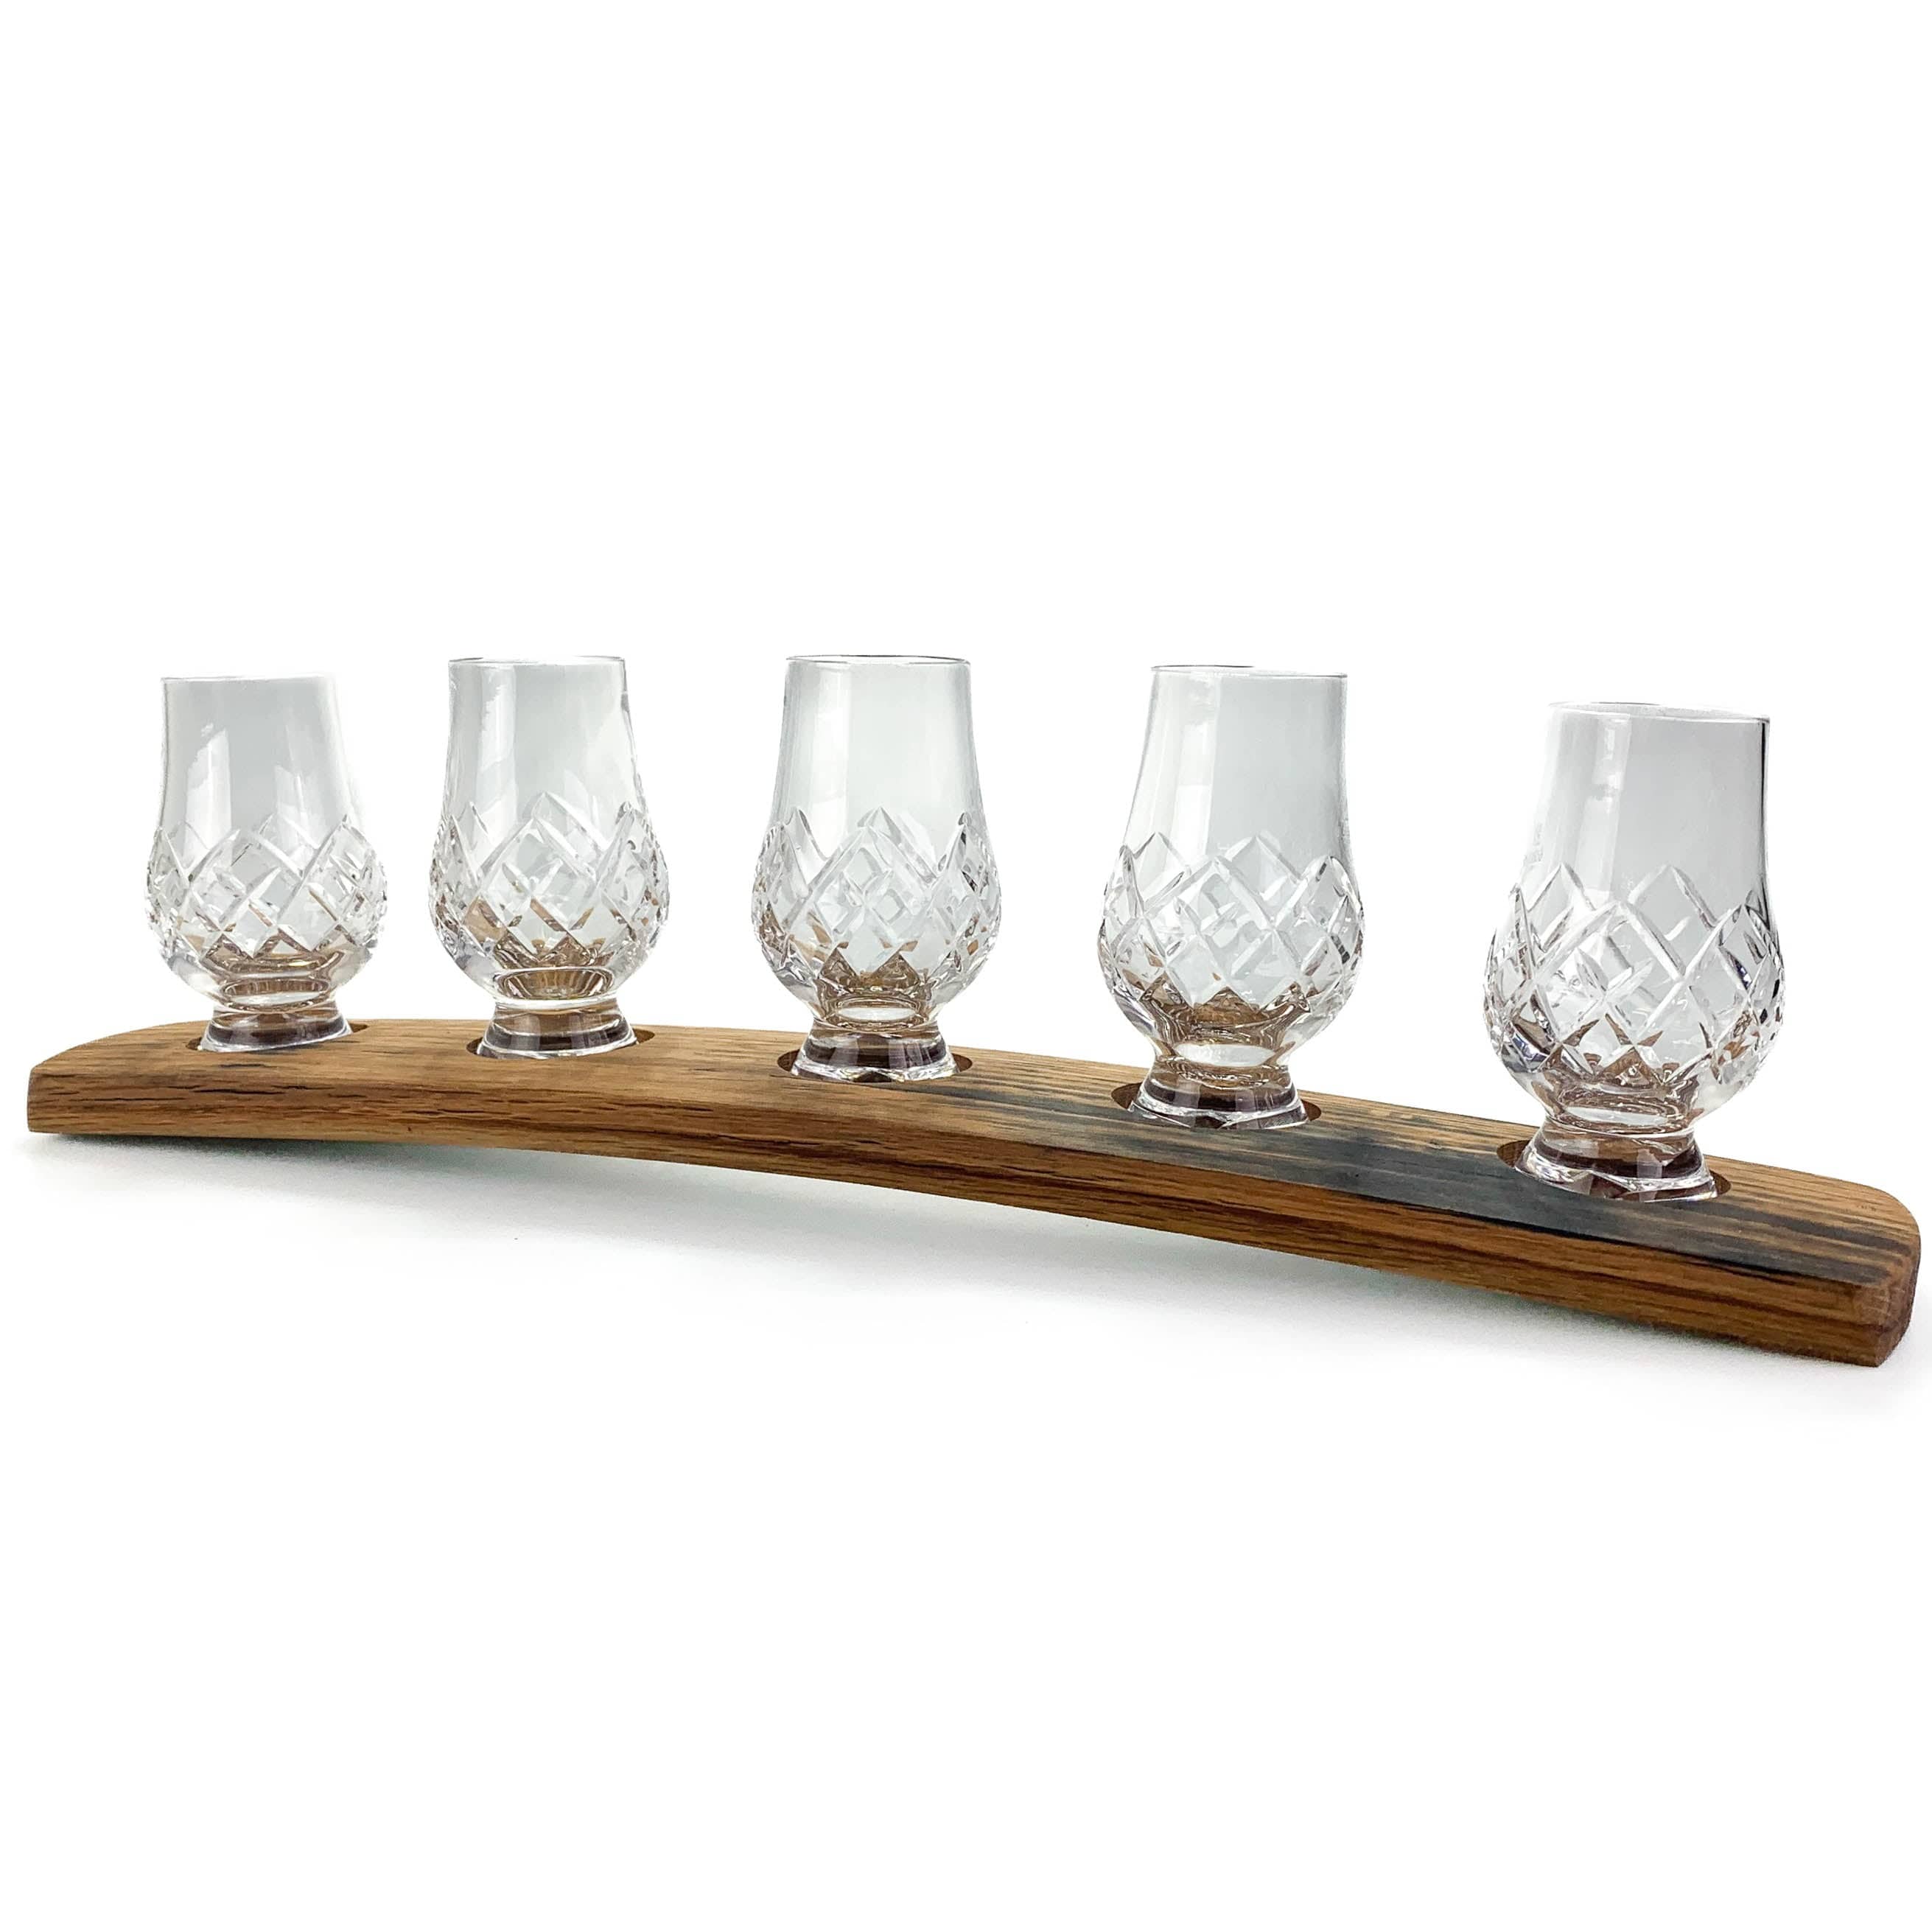 In this photo Darach glass holder with 5 Glencairn Cut glasses Mood4Whisky